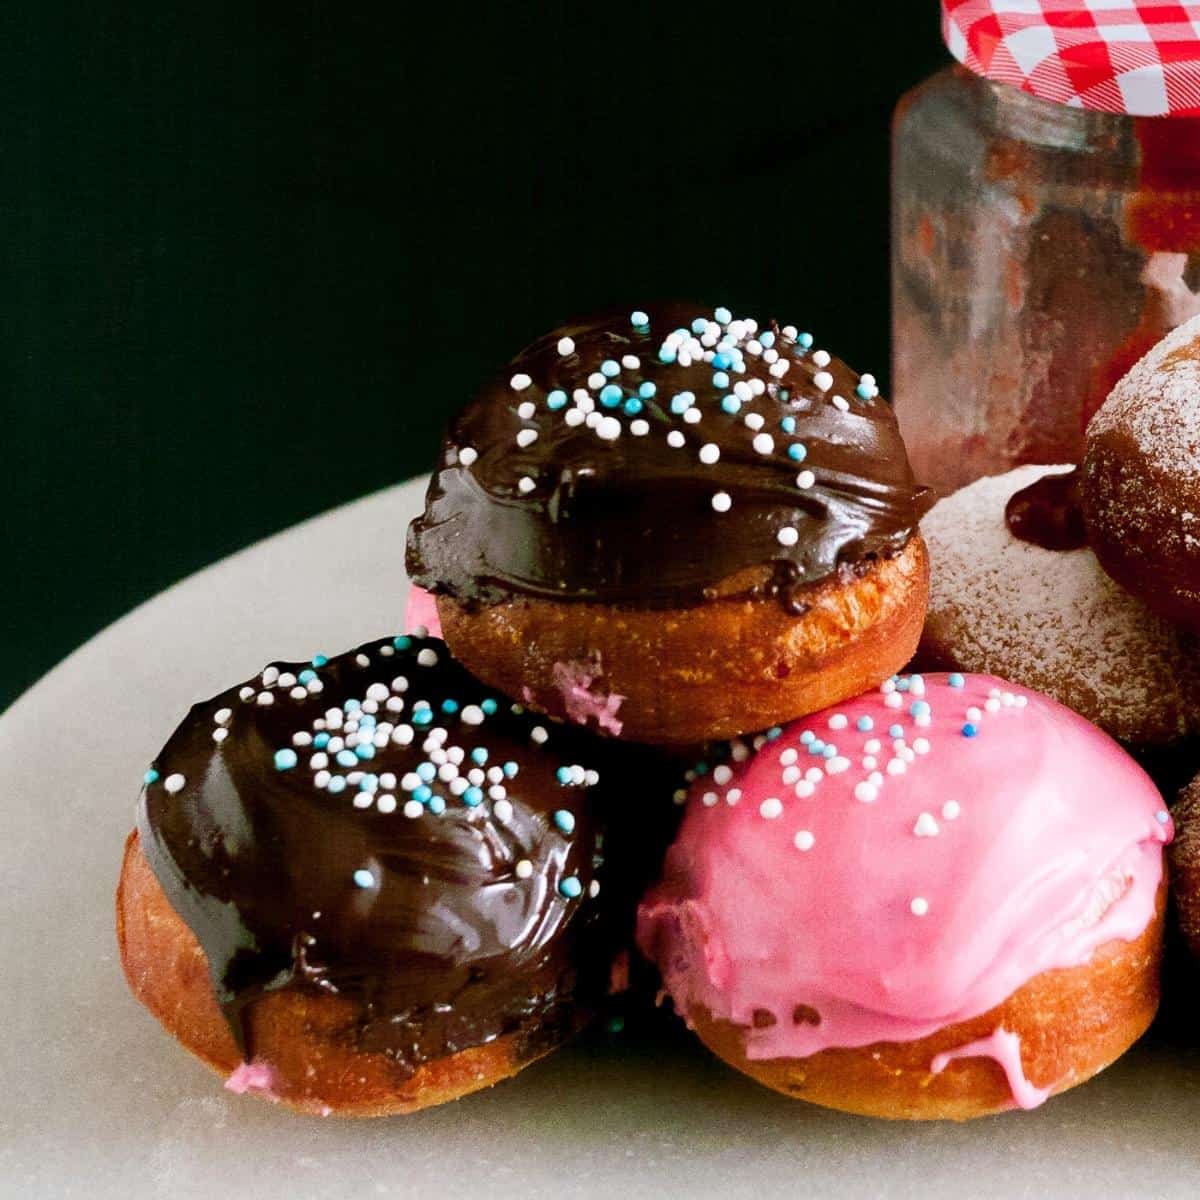 Chocolate donuts on a cake stand